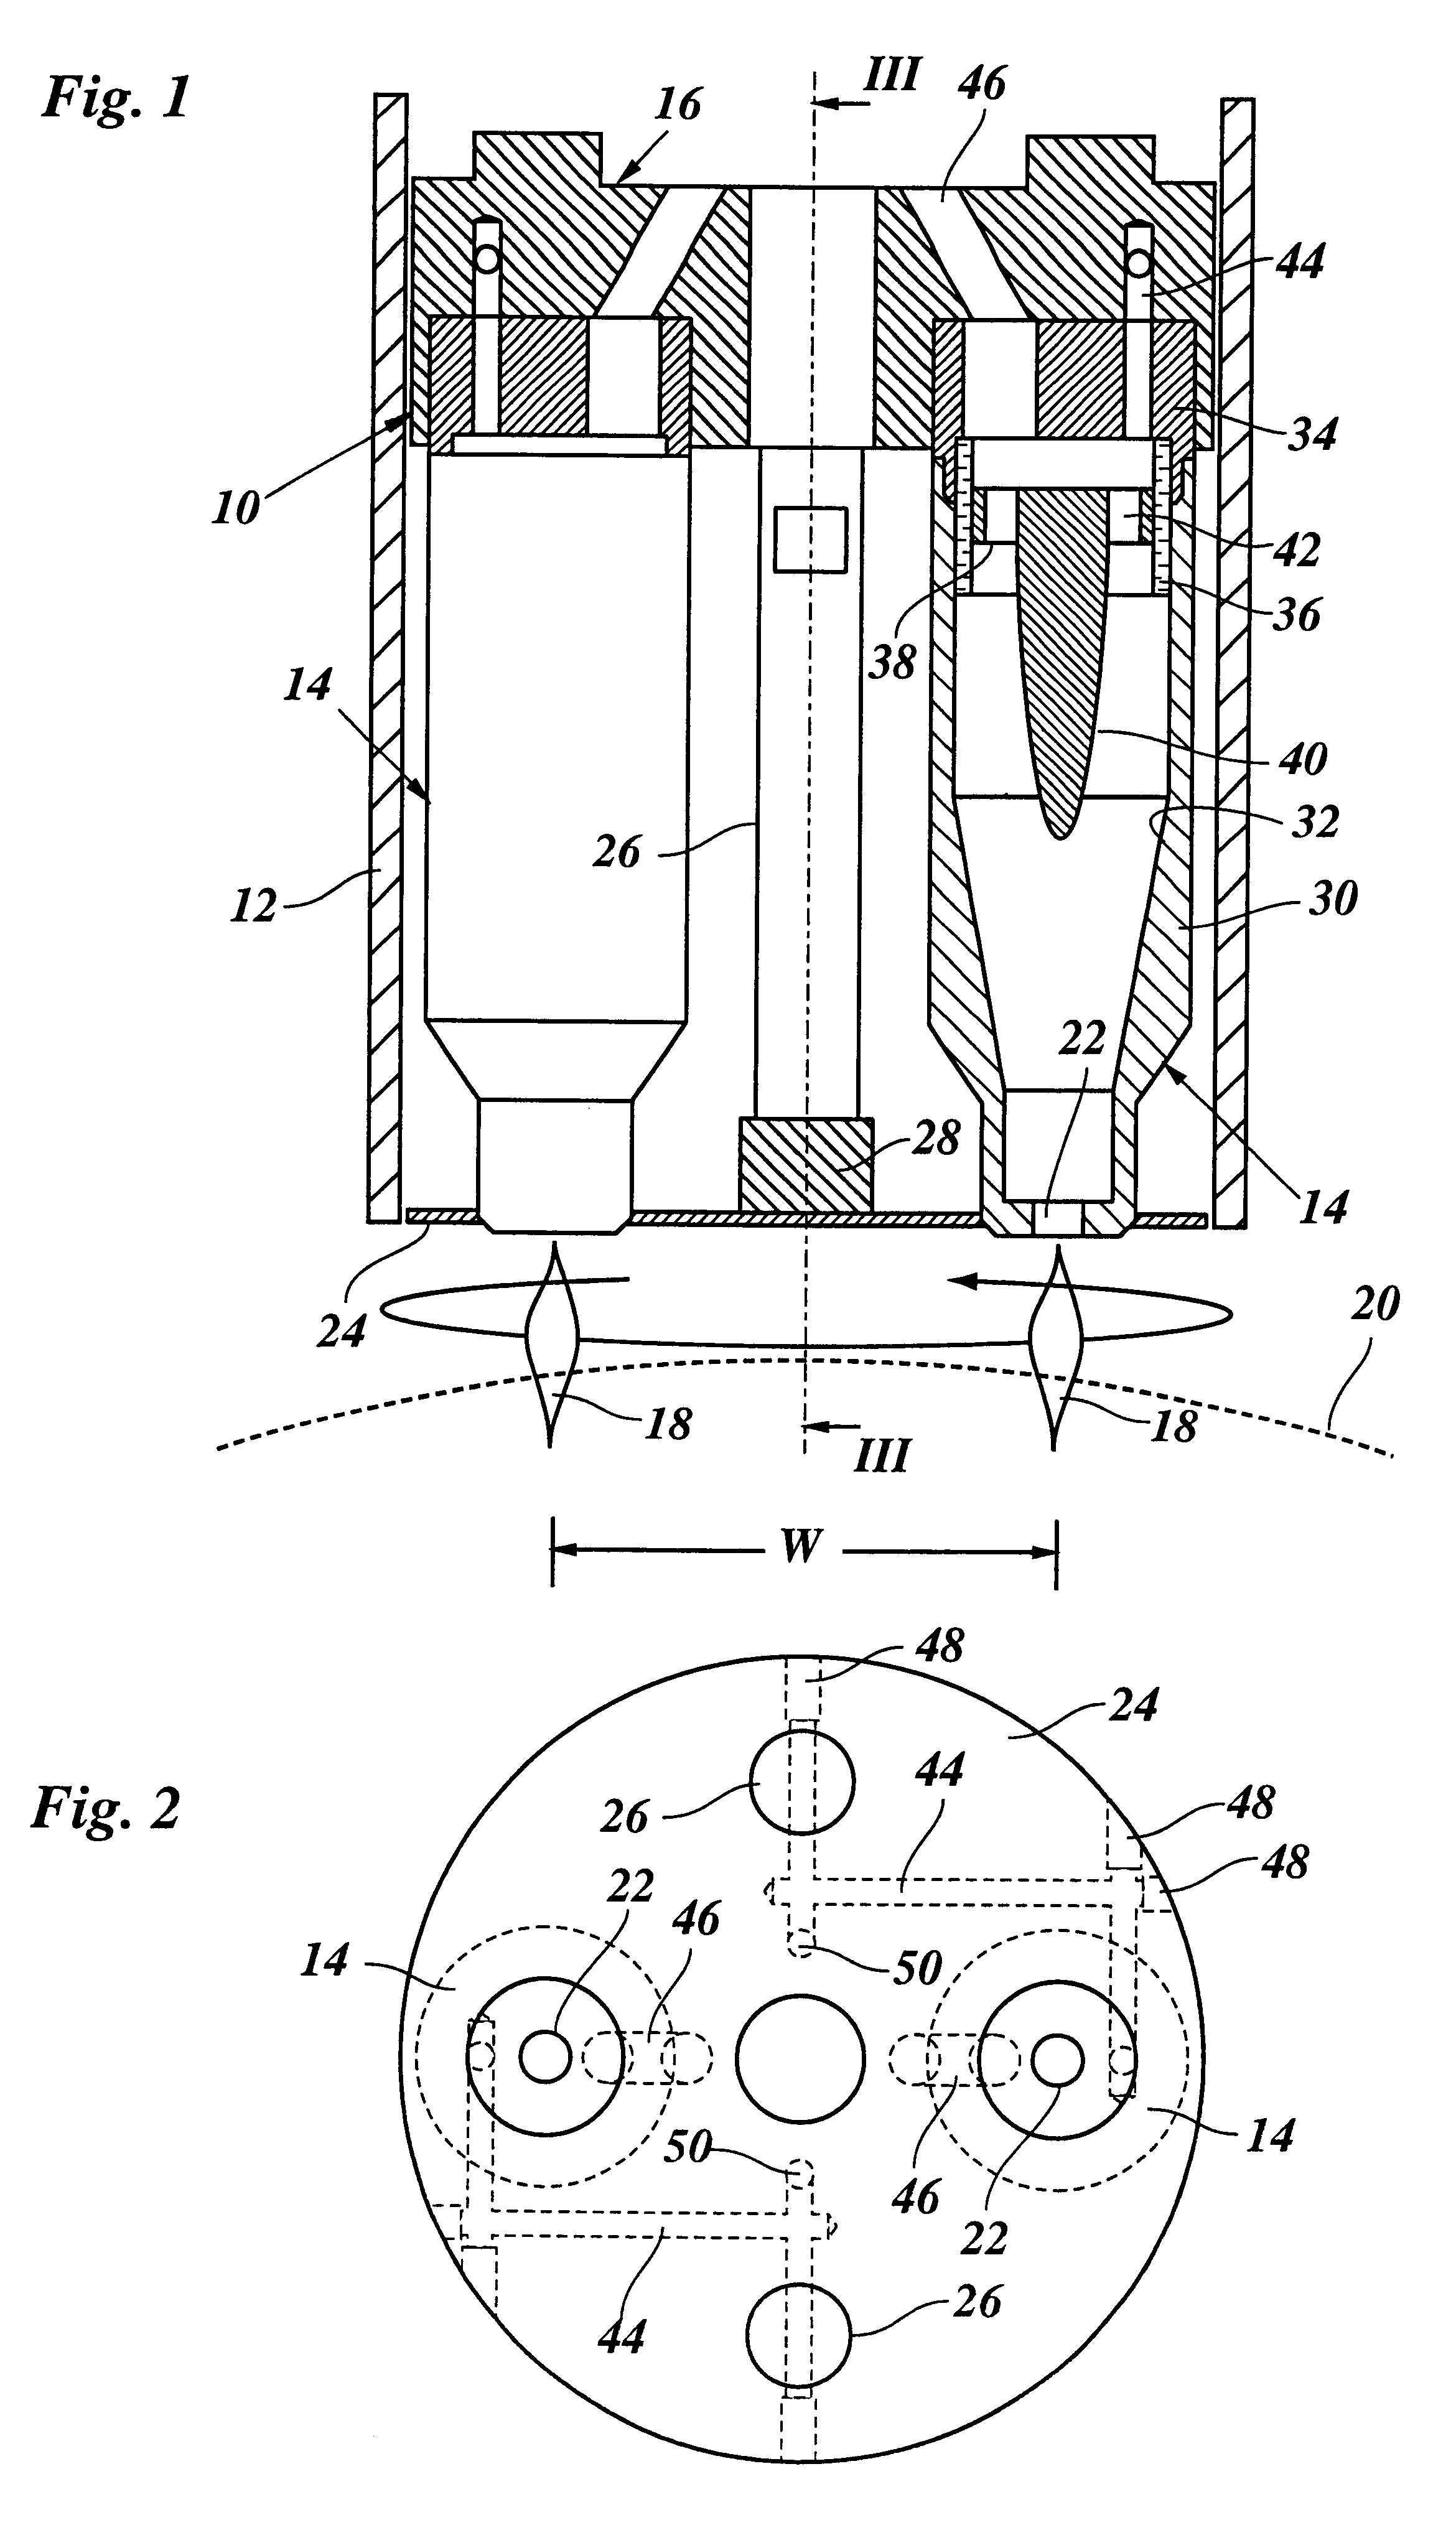 Plasma processing device for surfaces